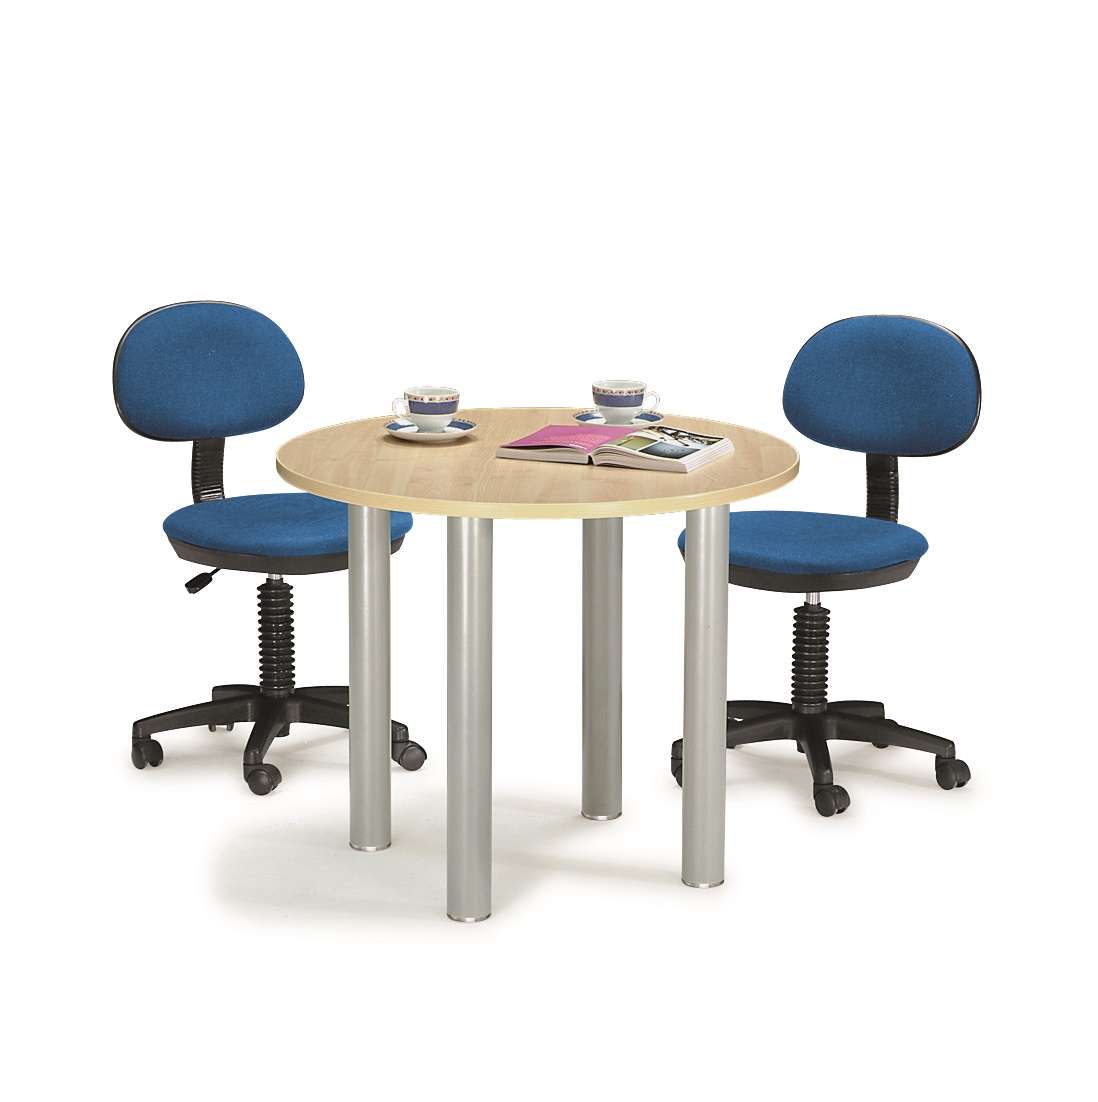 G-Series Discussion Table